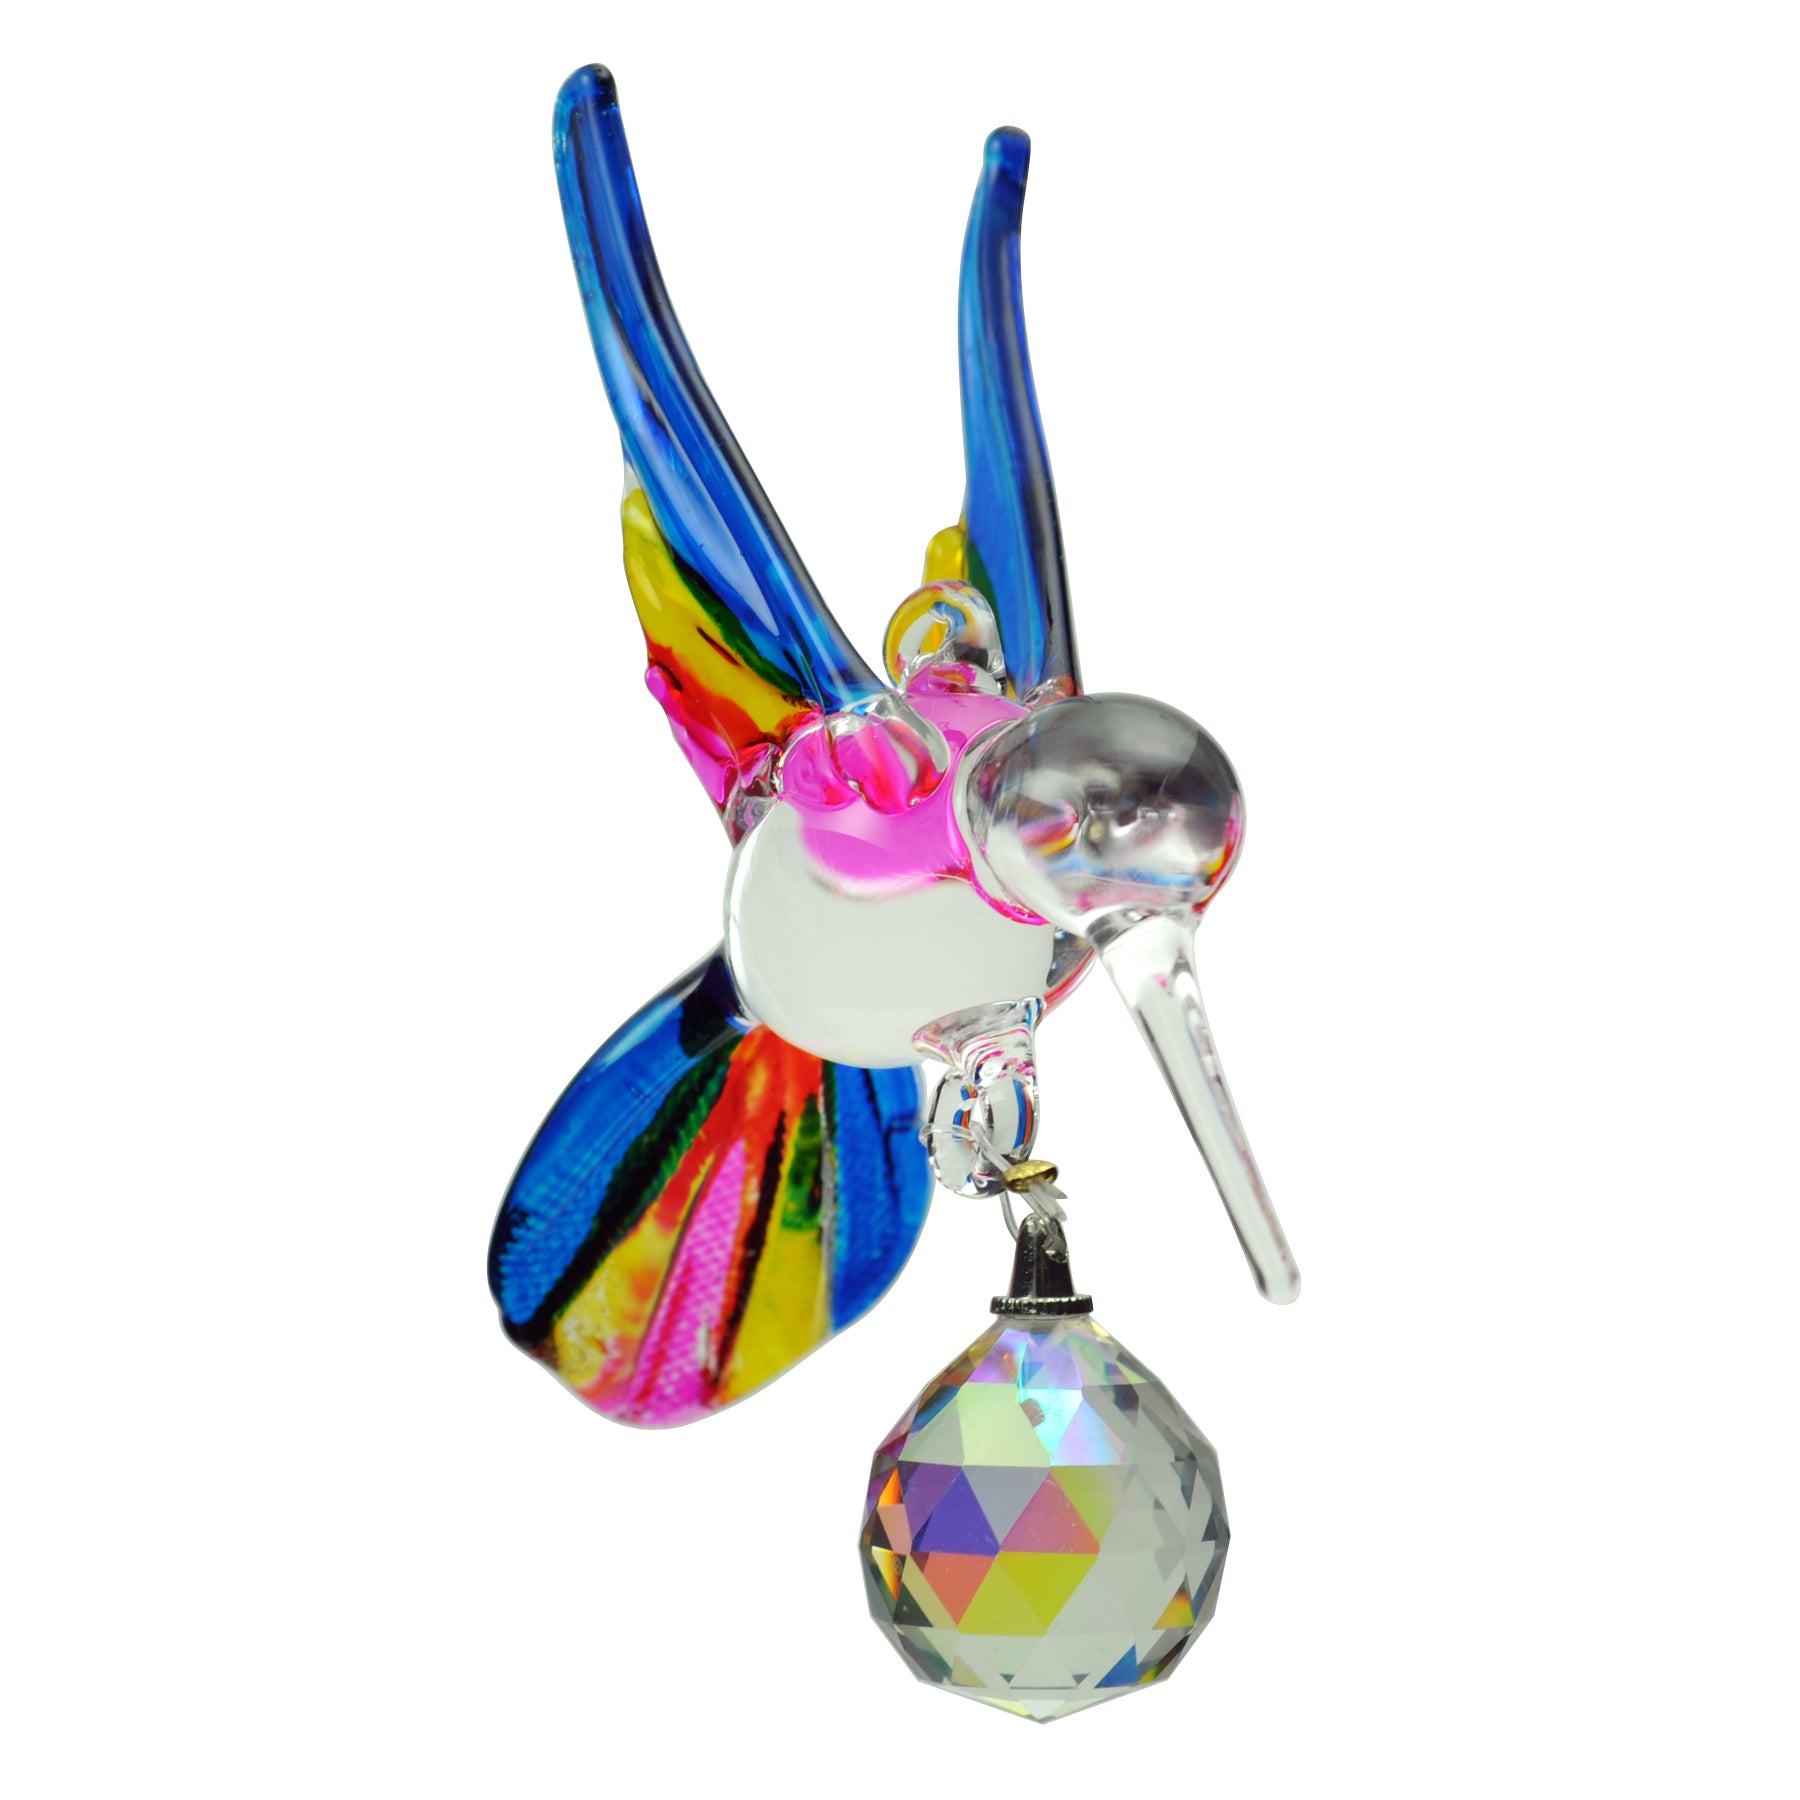 Crystal Castle Glass Multi-Colored Hummingbird ornament in Blue with Yellow and Pink accents and a small crystal ball ornament.